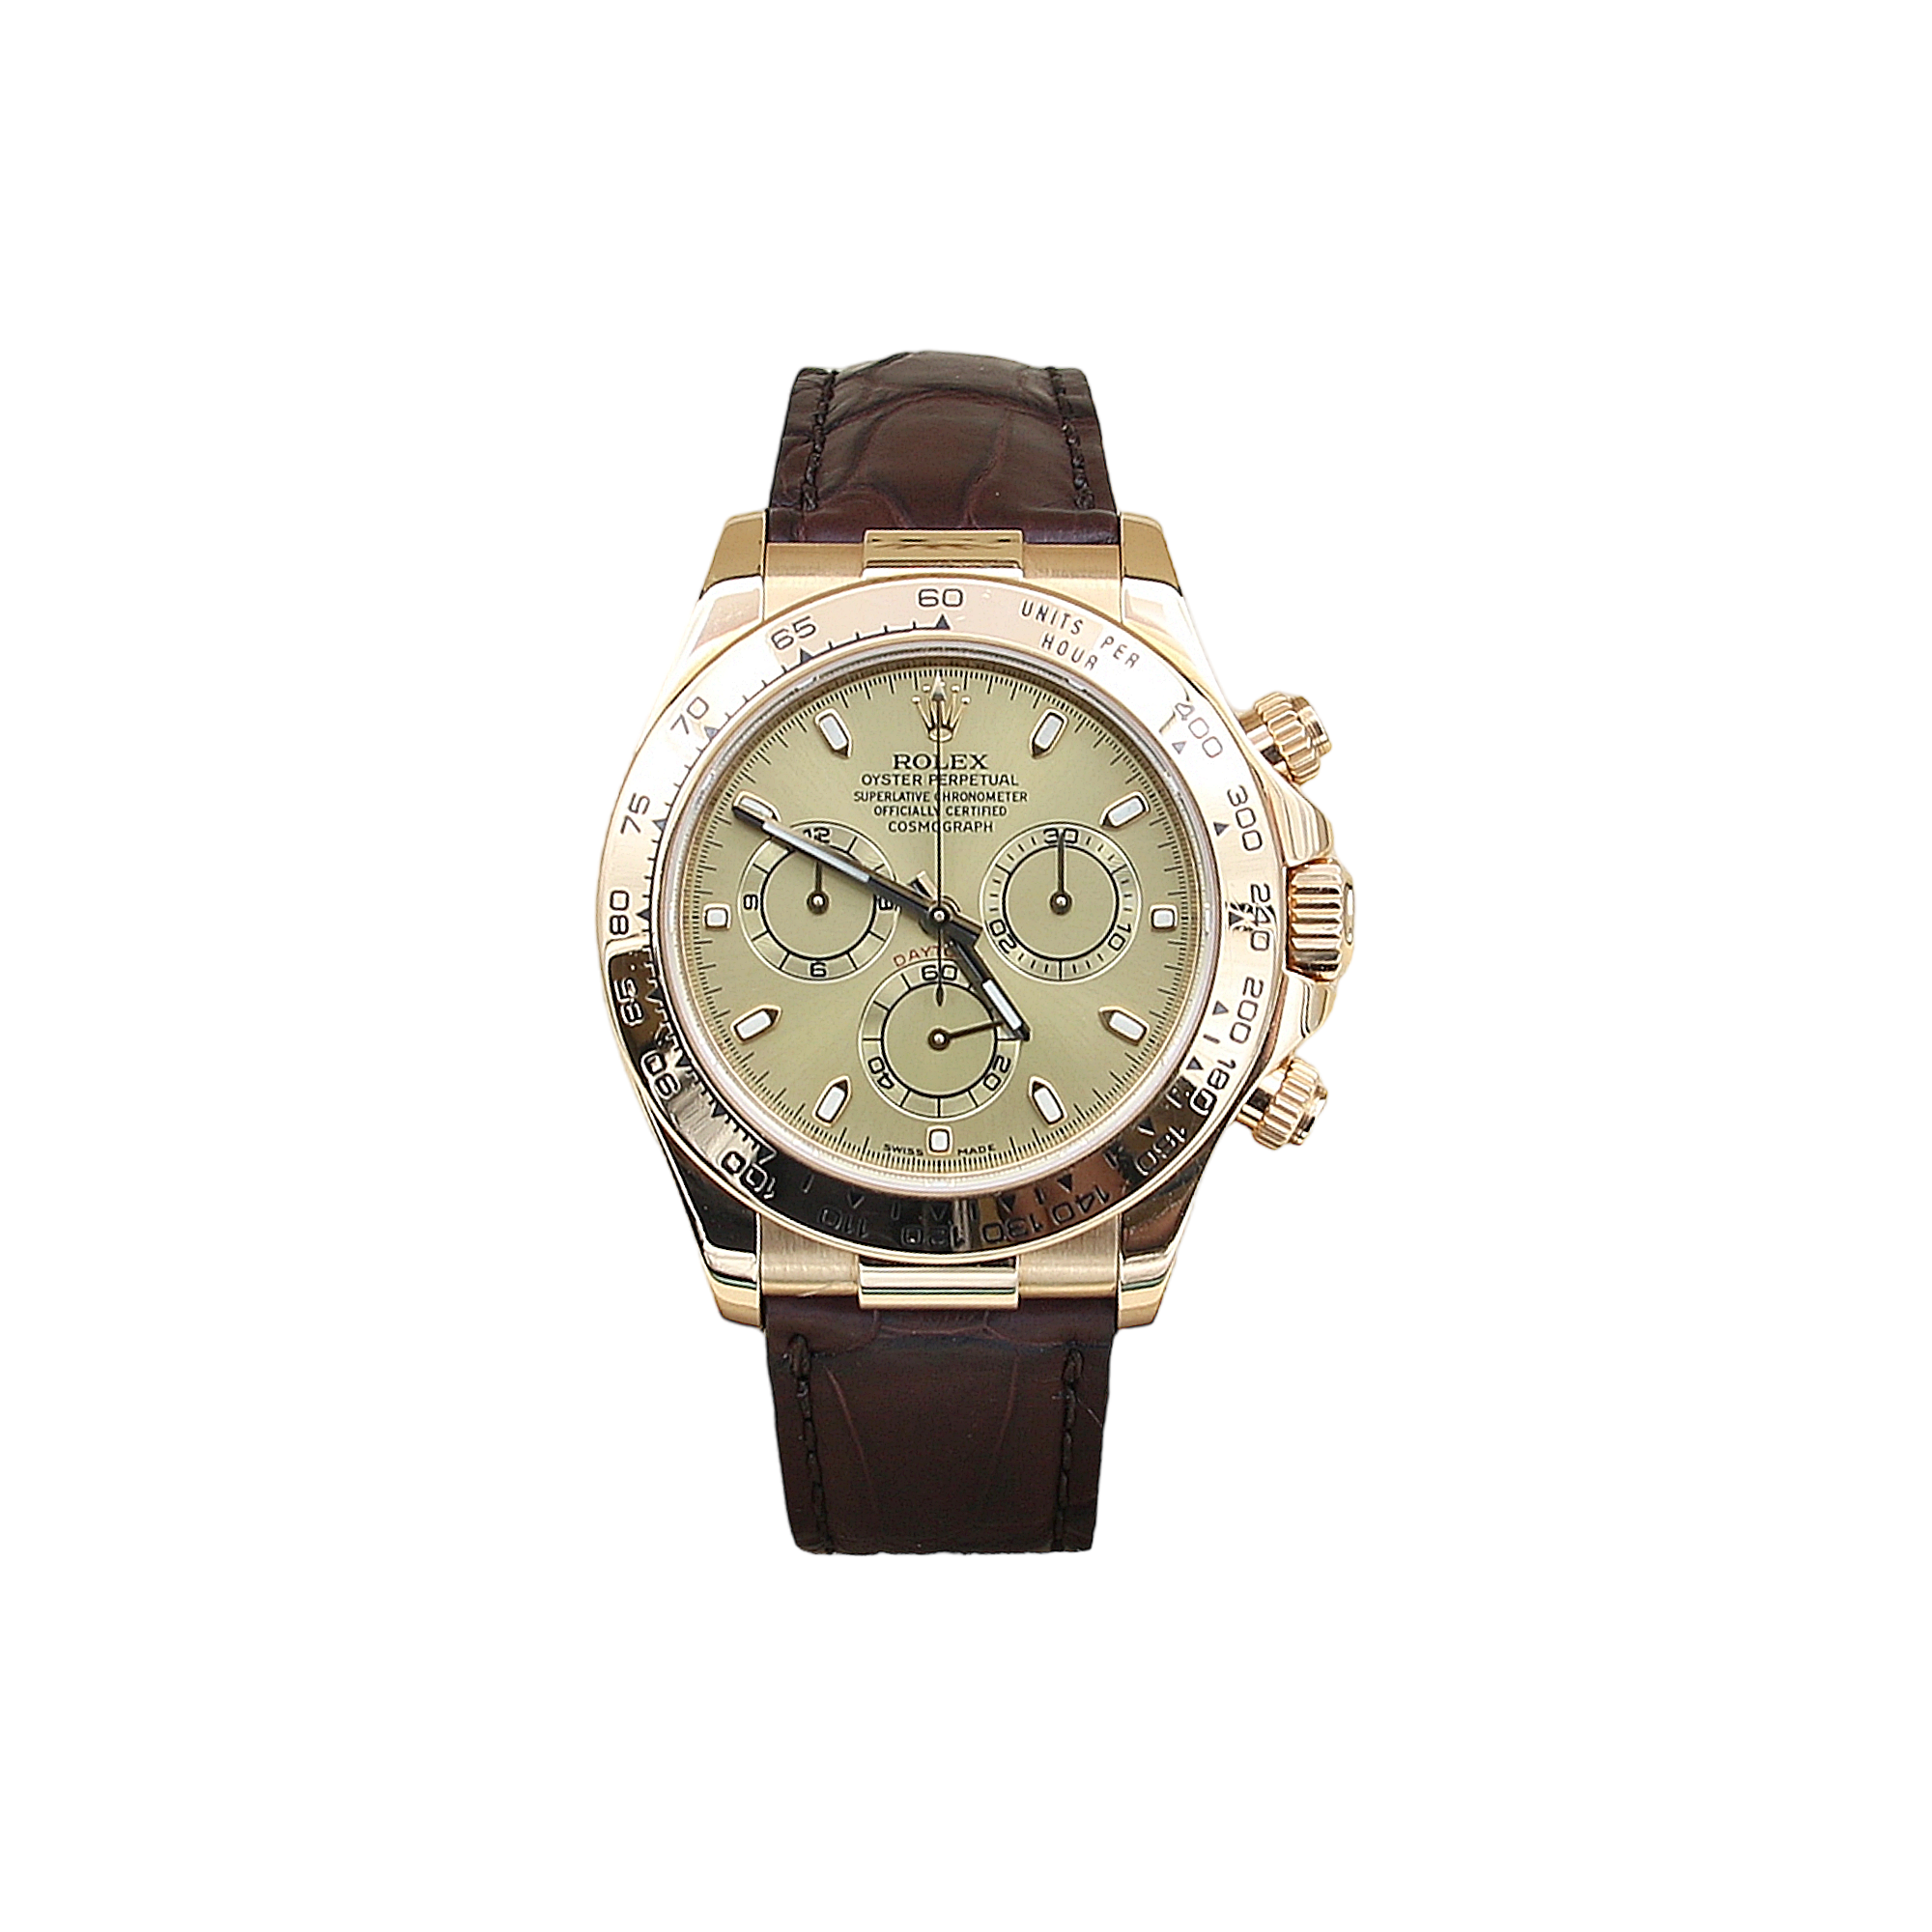 Rolex Daytona ref. 116518 - 18k Yellow Gold and Leather Strap - Champagne dial with gold subdials- Full Set